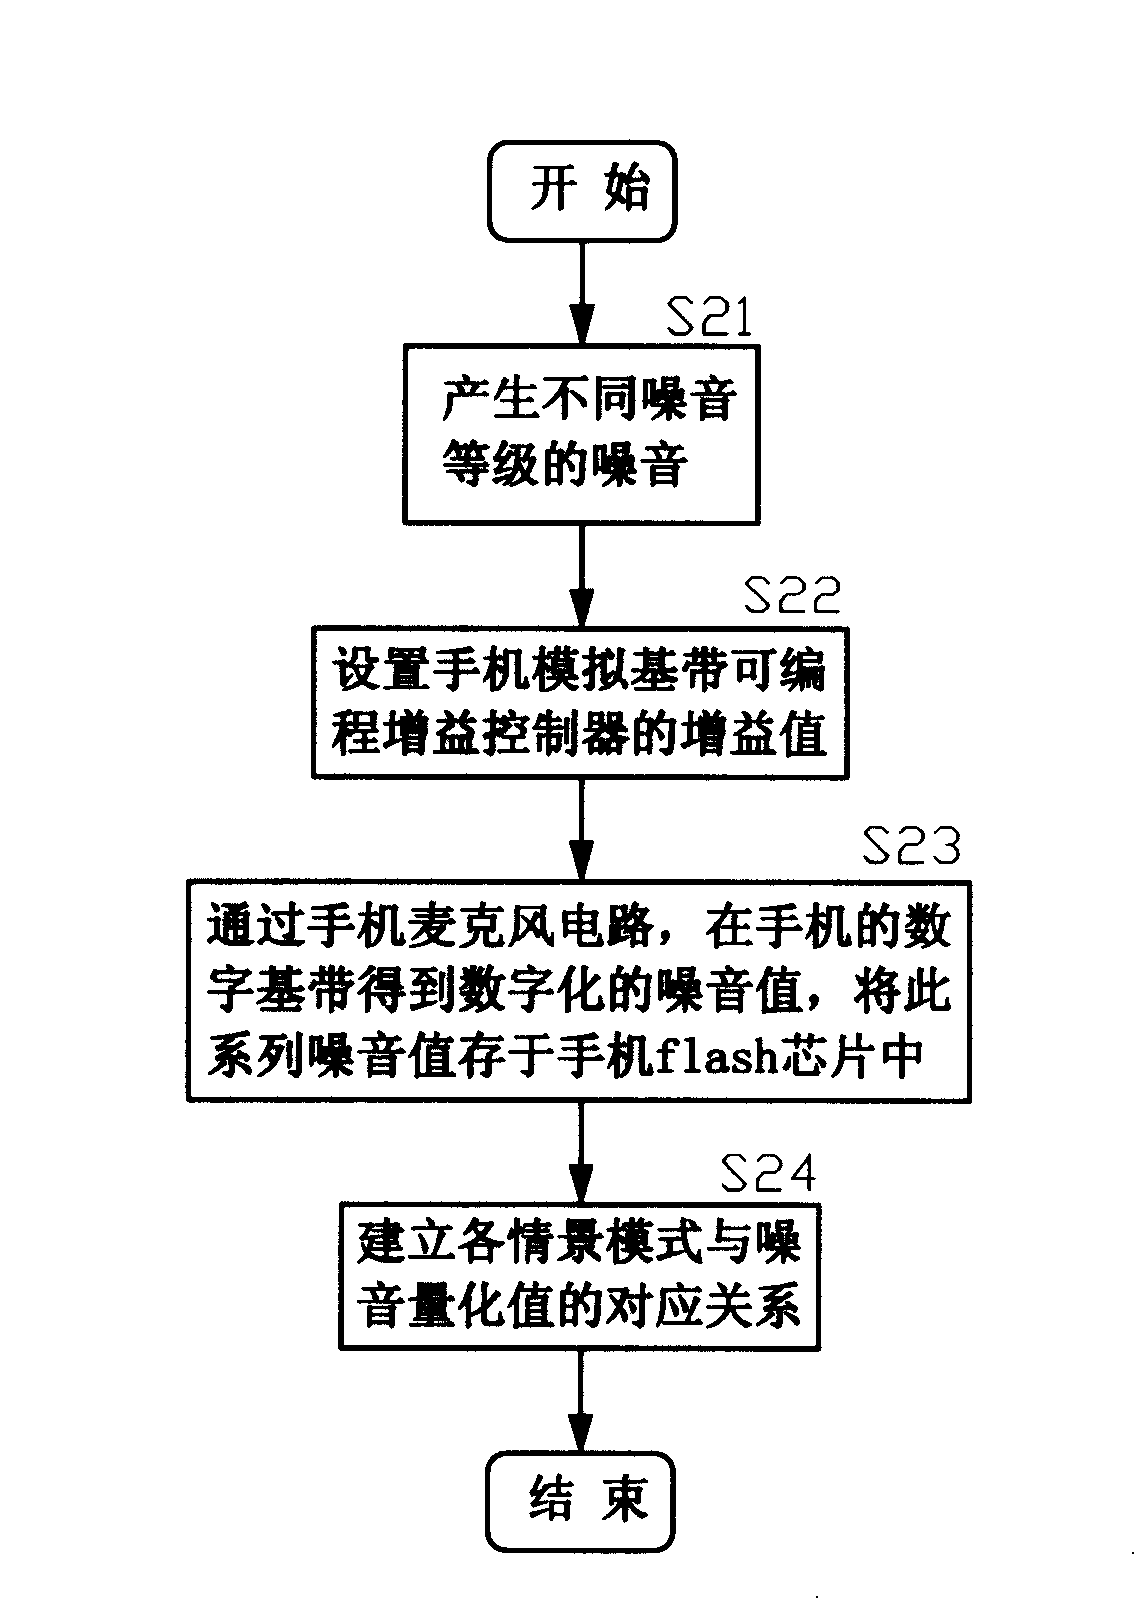 Method and device for automatically selecting scenario mode according to environmental noise method on mobile phone